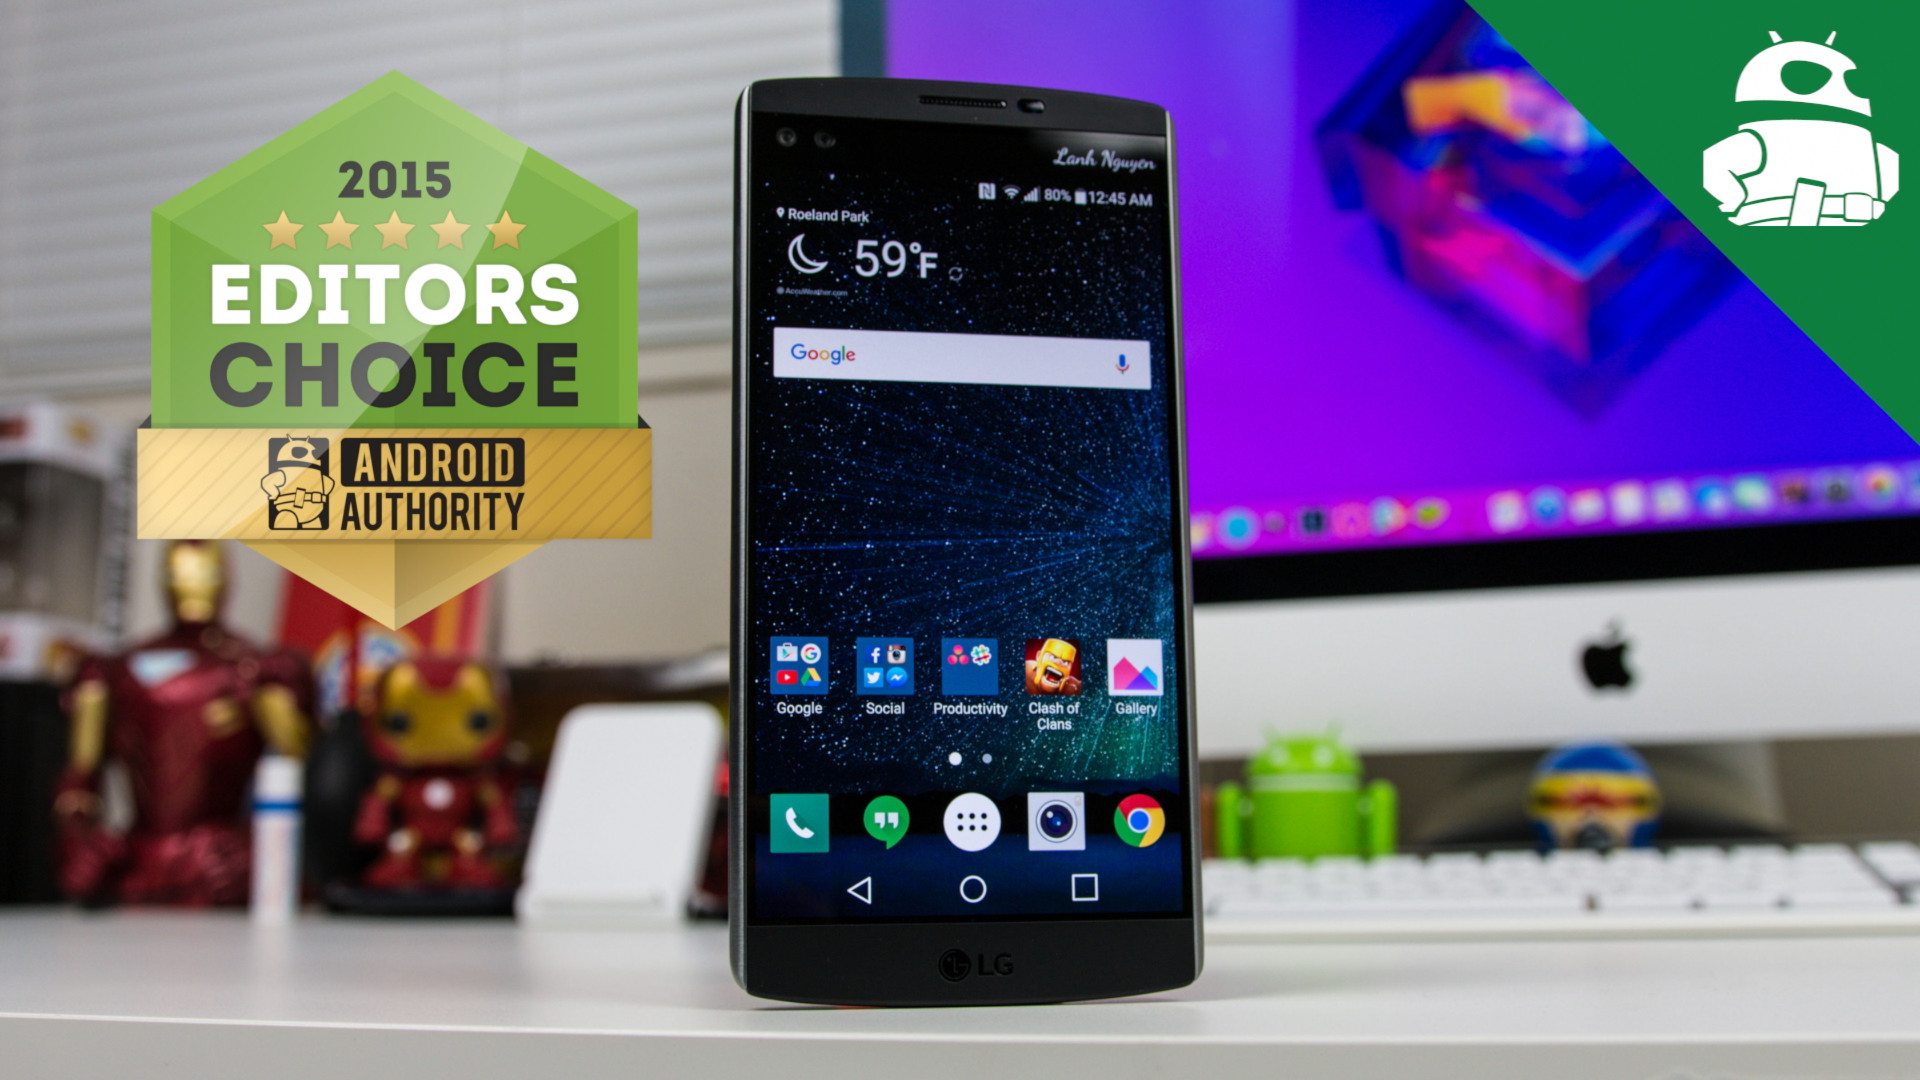 LG V10 featured